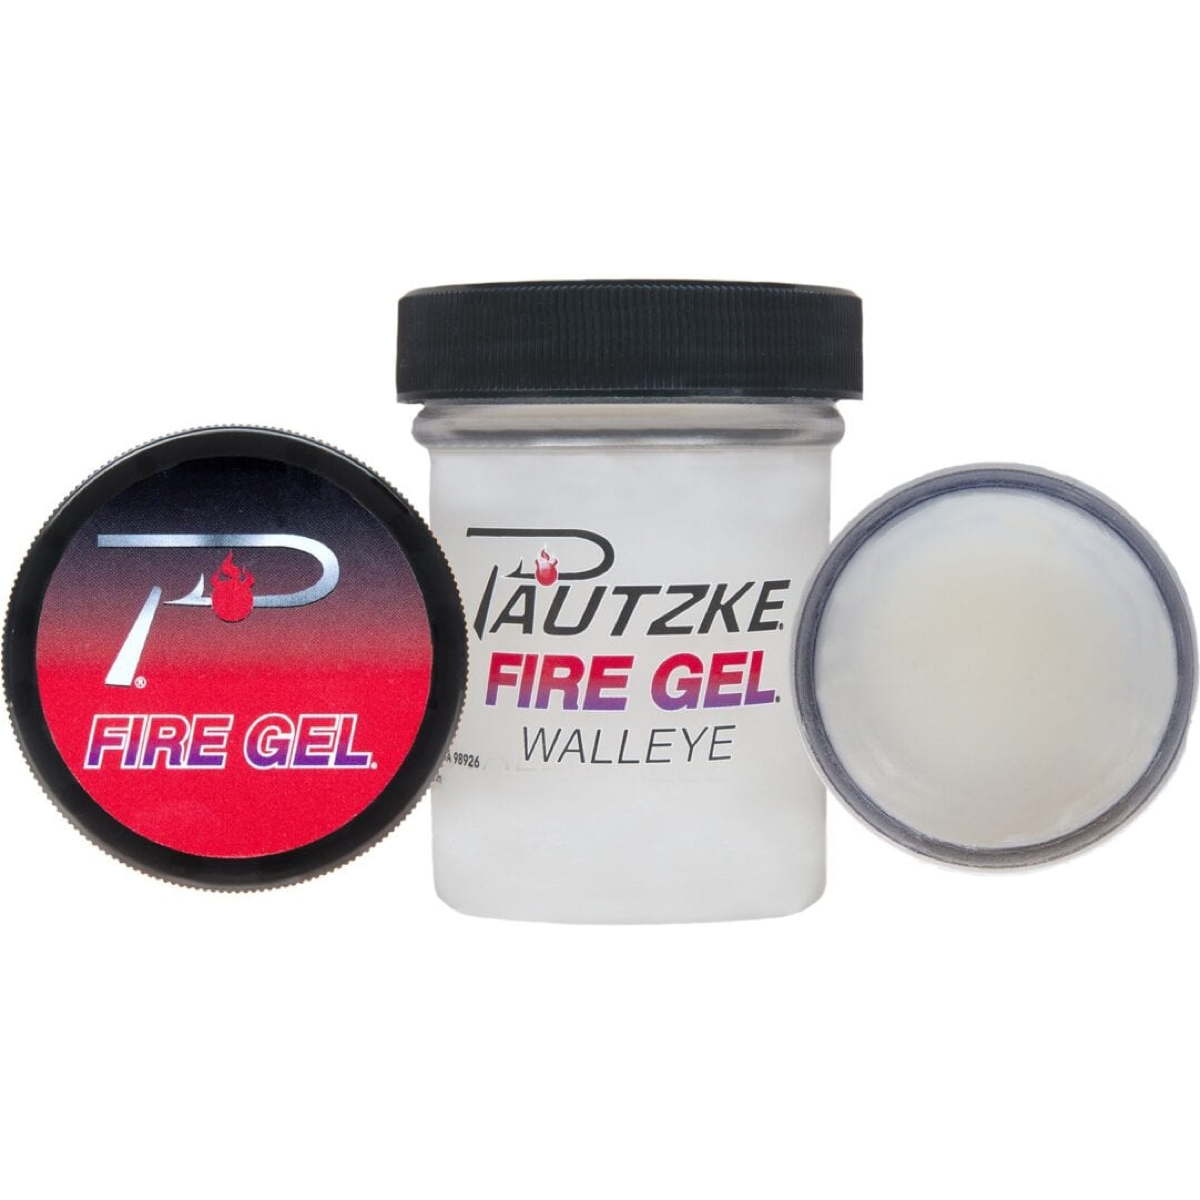 Photo of Pautzke Bait Company Fire Gel for sale at United Tackle Shops.